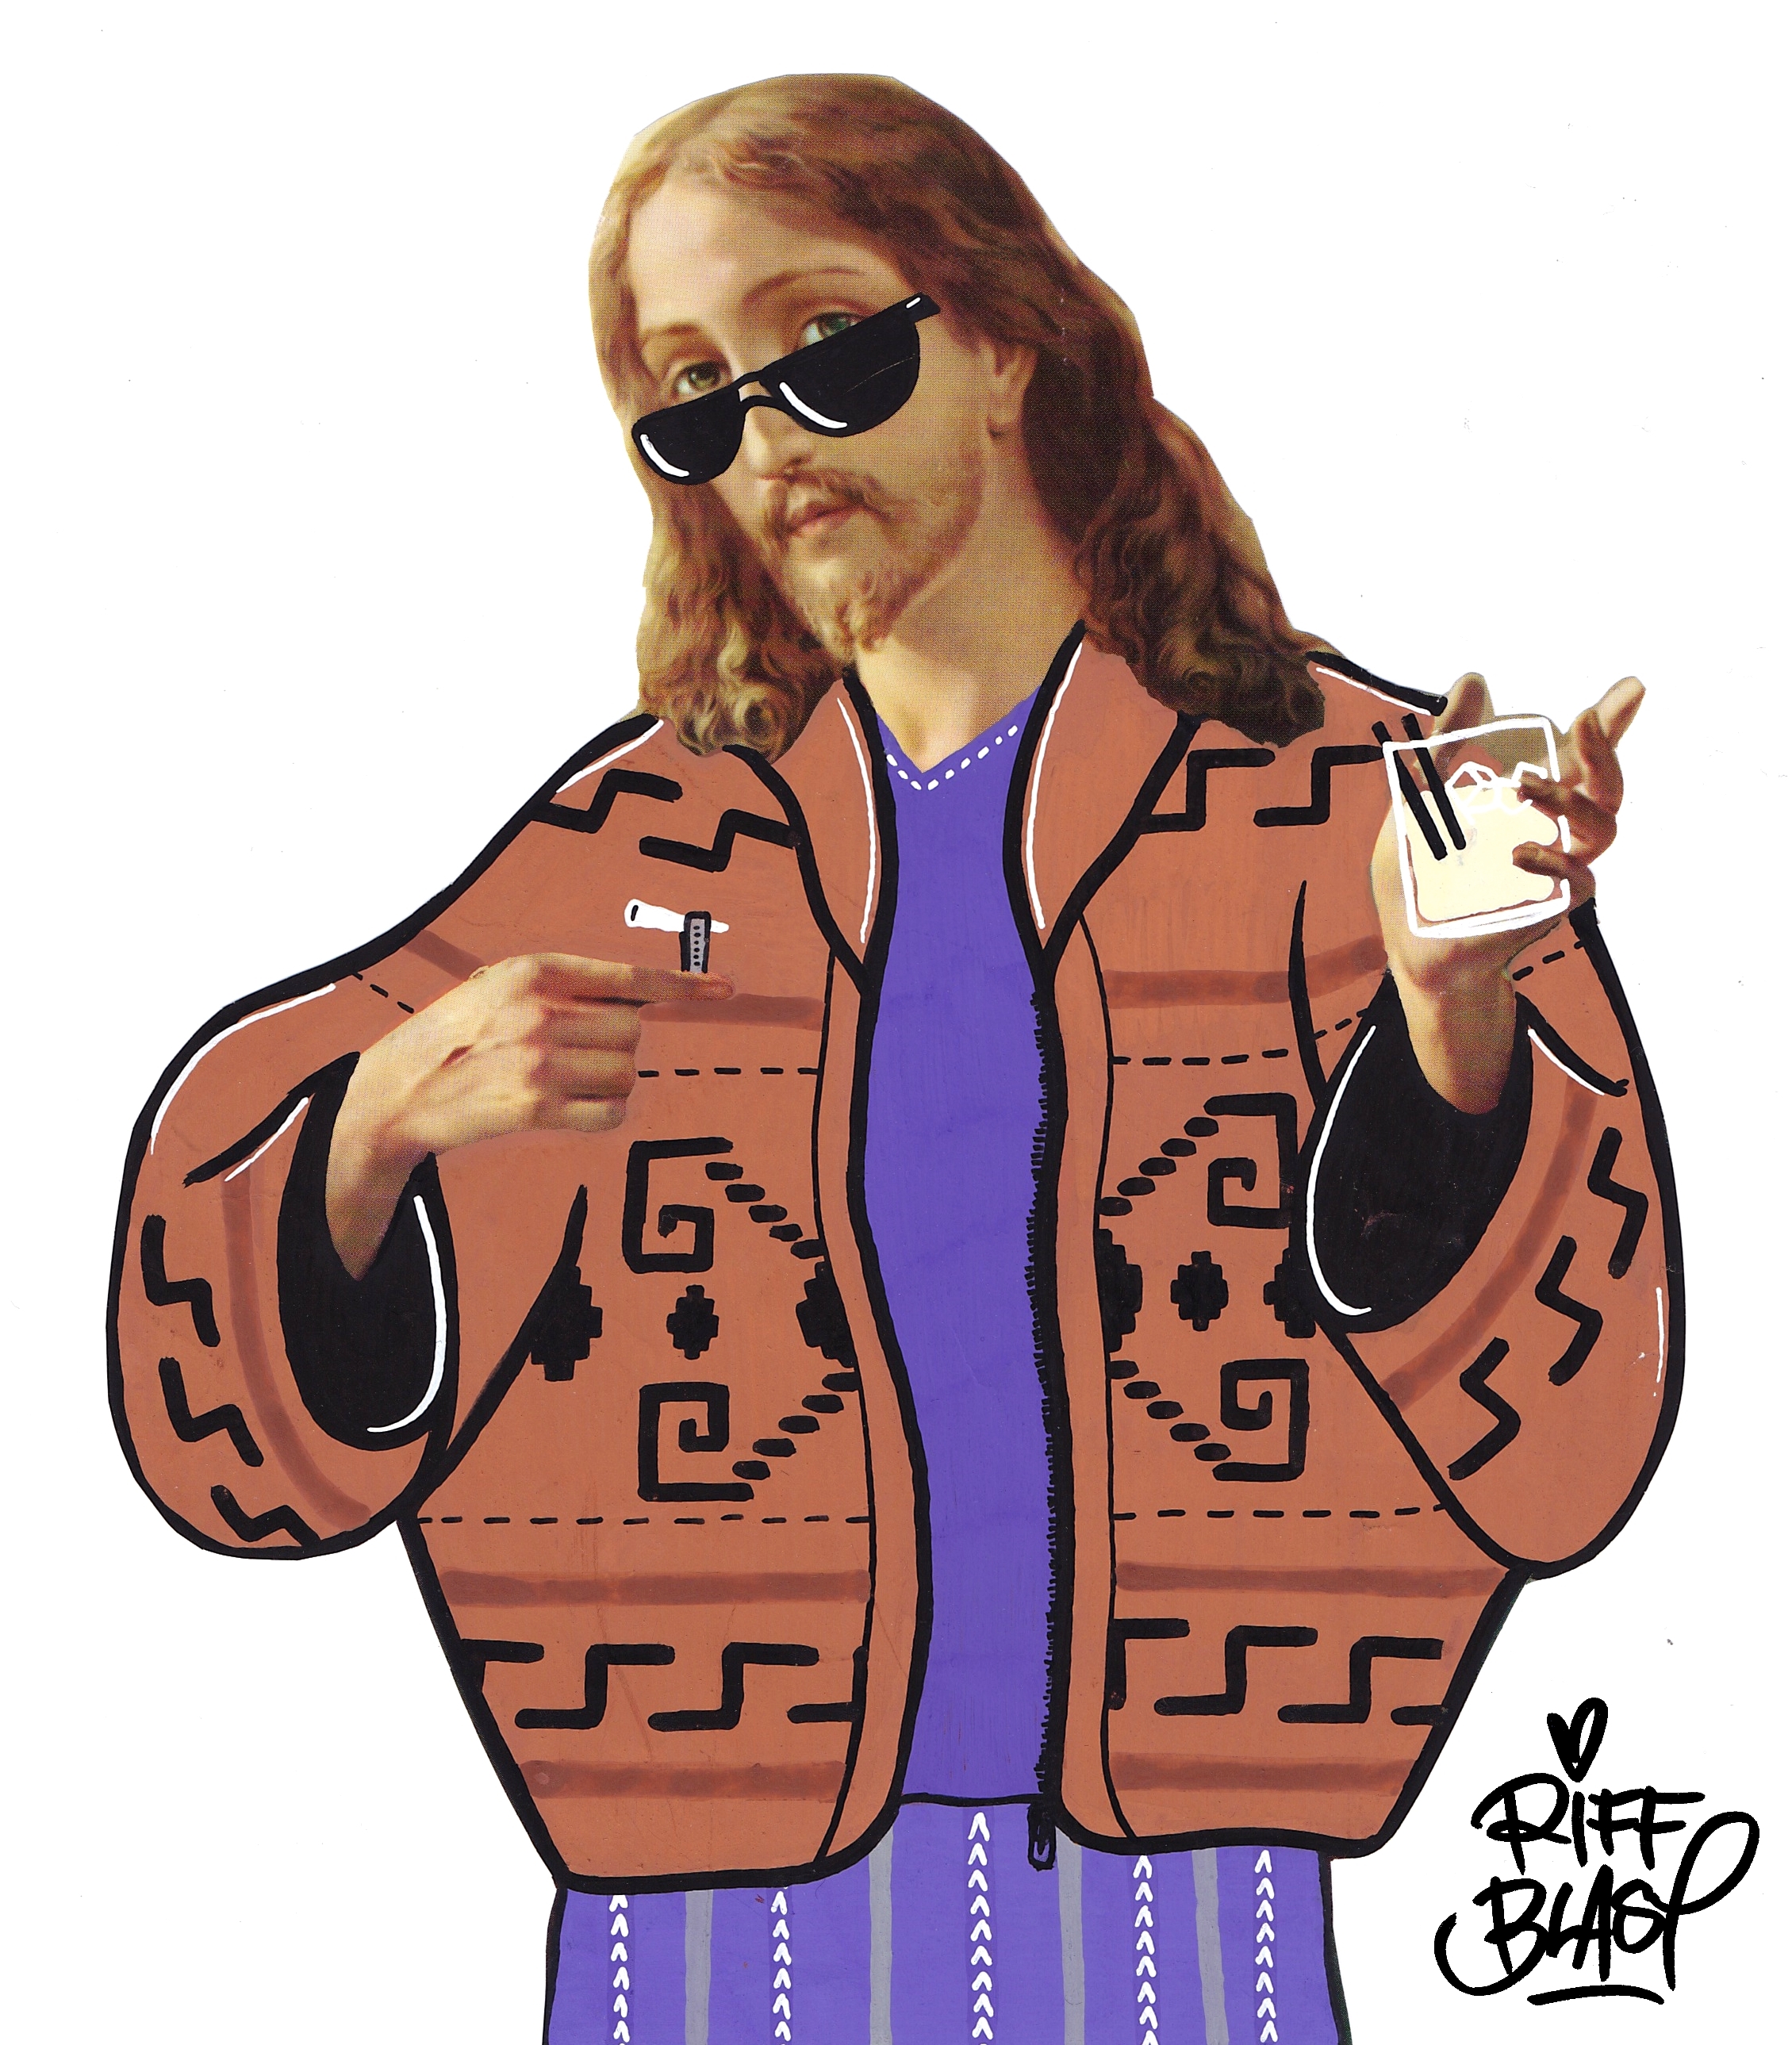 “The Dude” from The Big Lebowski (1998) .